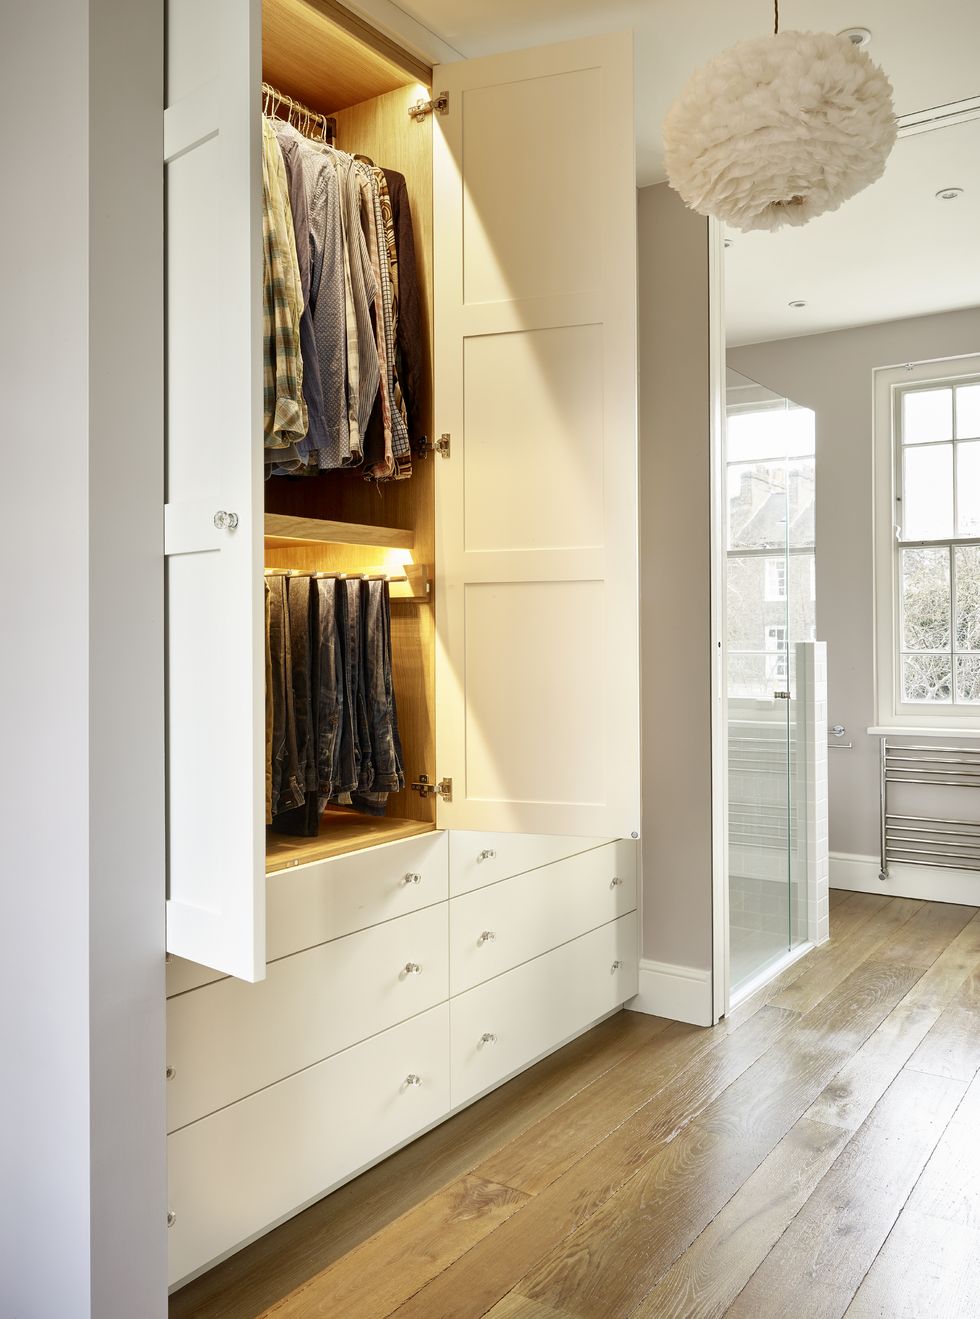 How to Turn a Spare Bedroom into a Diva Closet